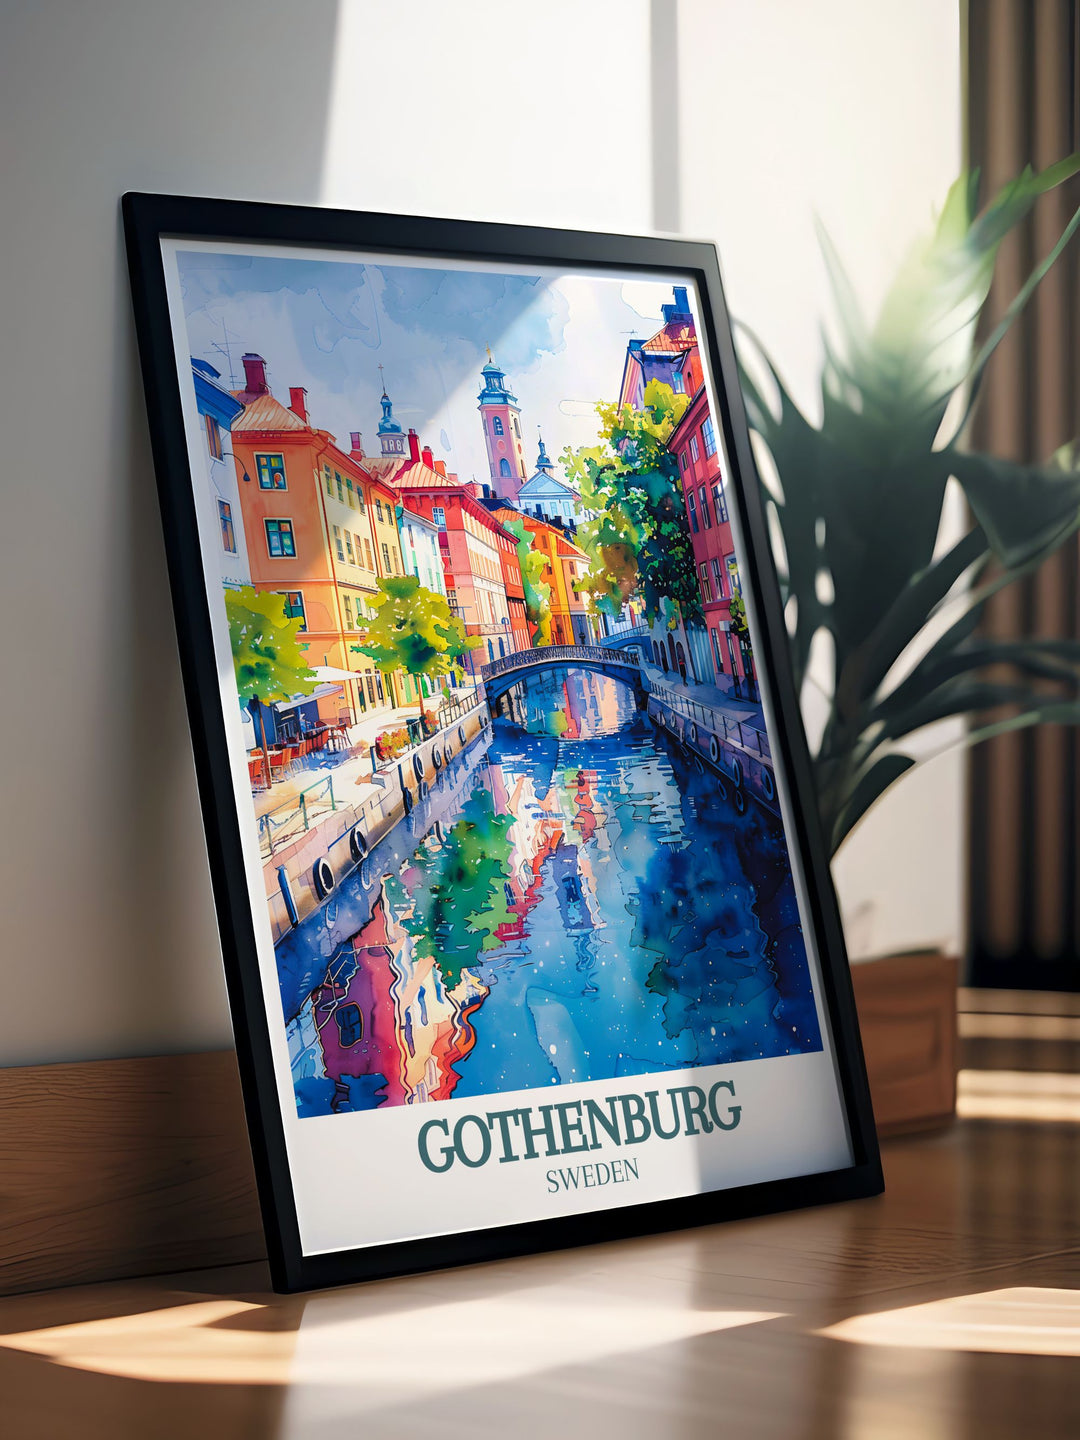 Celebrating the rich history of Gothenburg, this travel poster features the citys historic buildings and picturesque canals. Perfect for history buffs and travelers, this artwork offers a glimpse into the captivating heritage of Swedens second largest city.